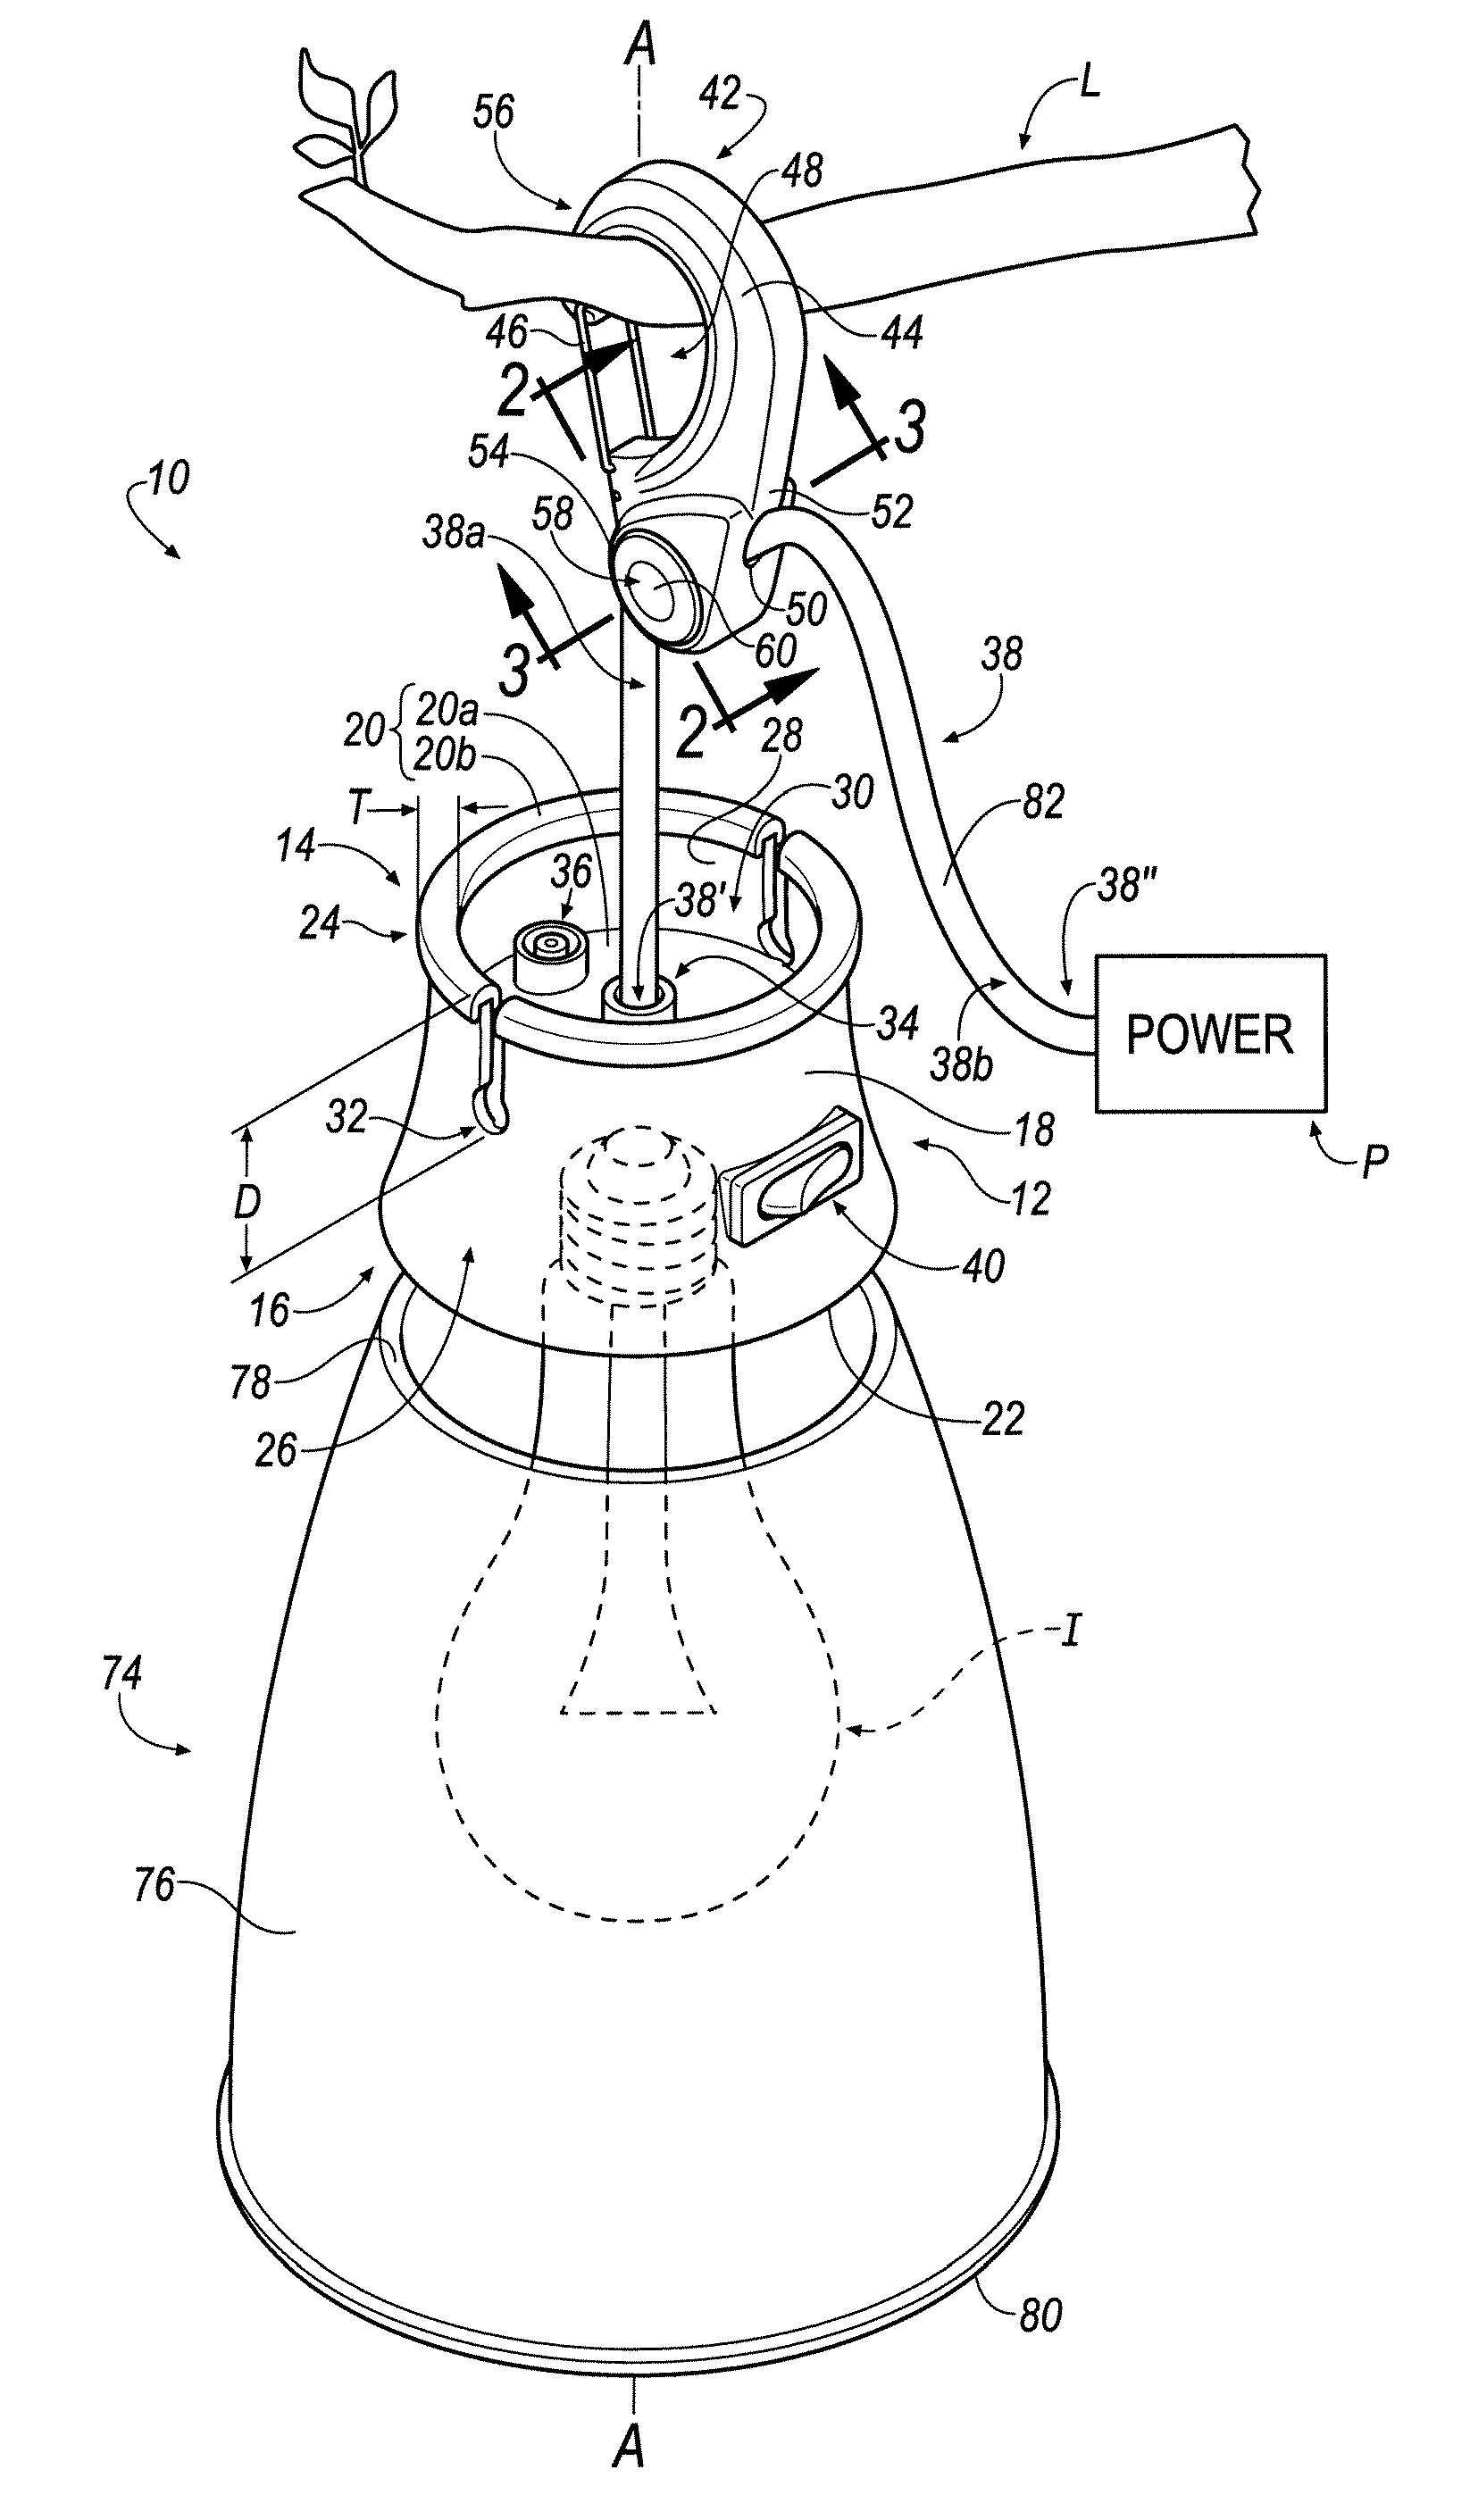 Lighting apparatus; components thereof and assemblies incorporating the same